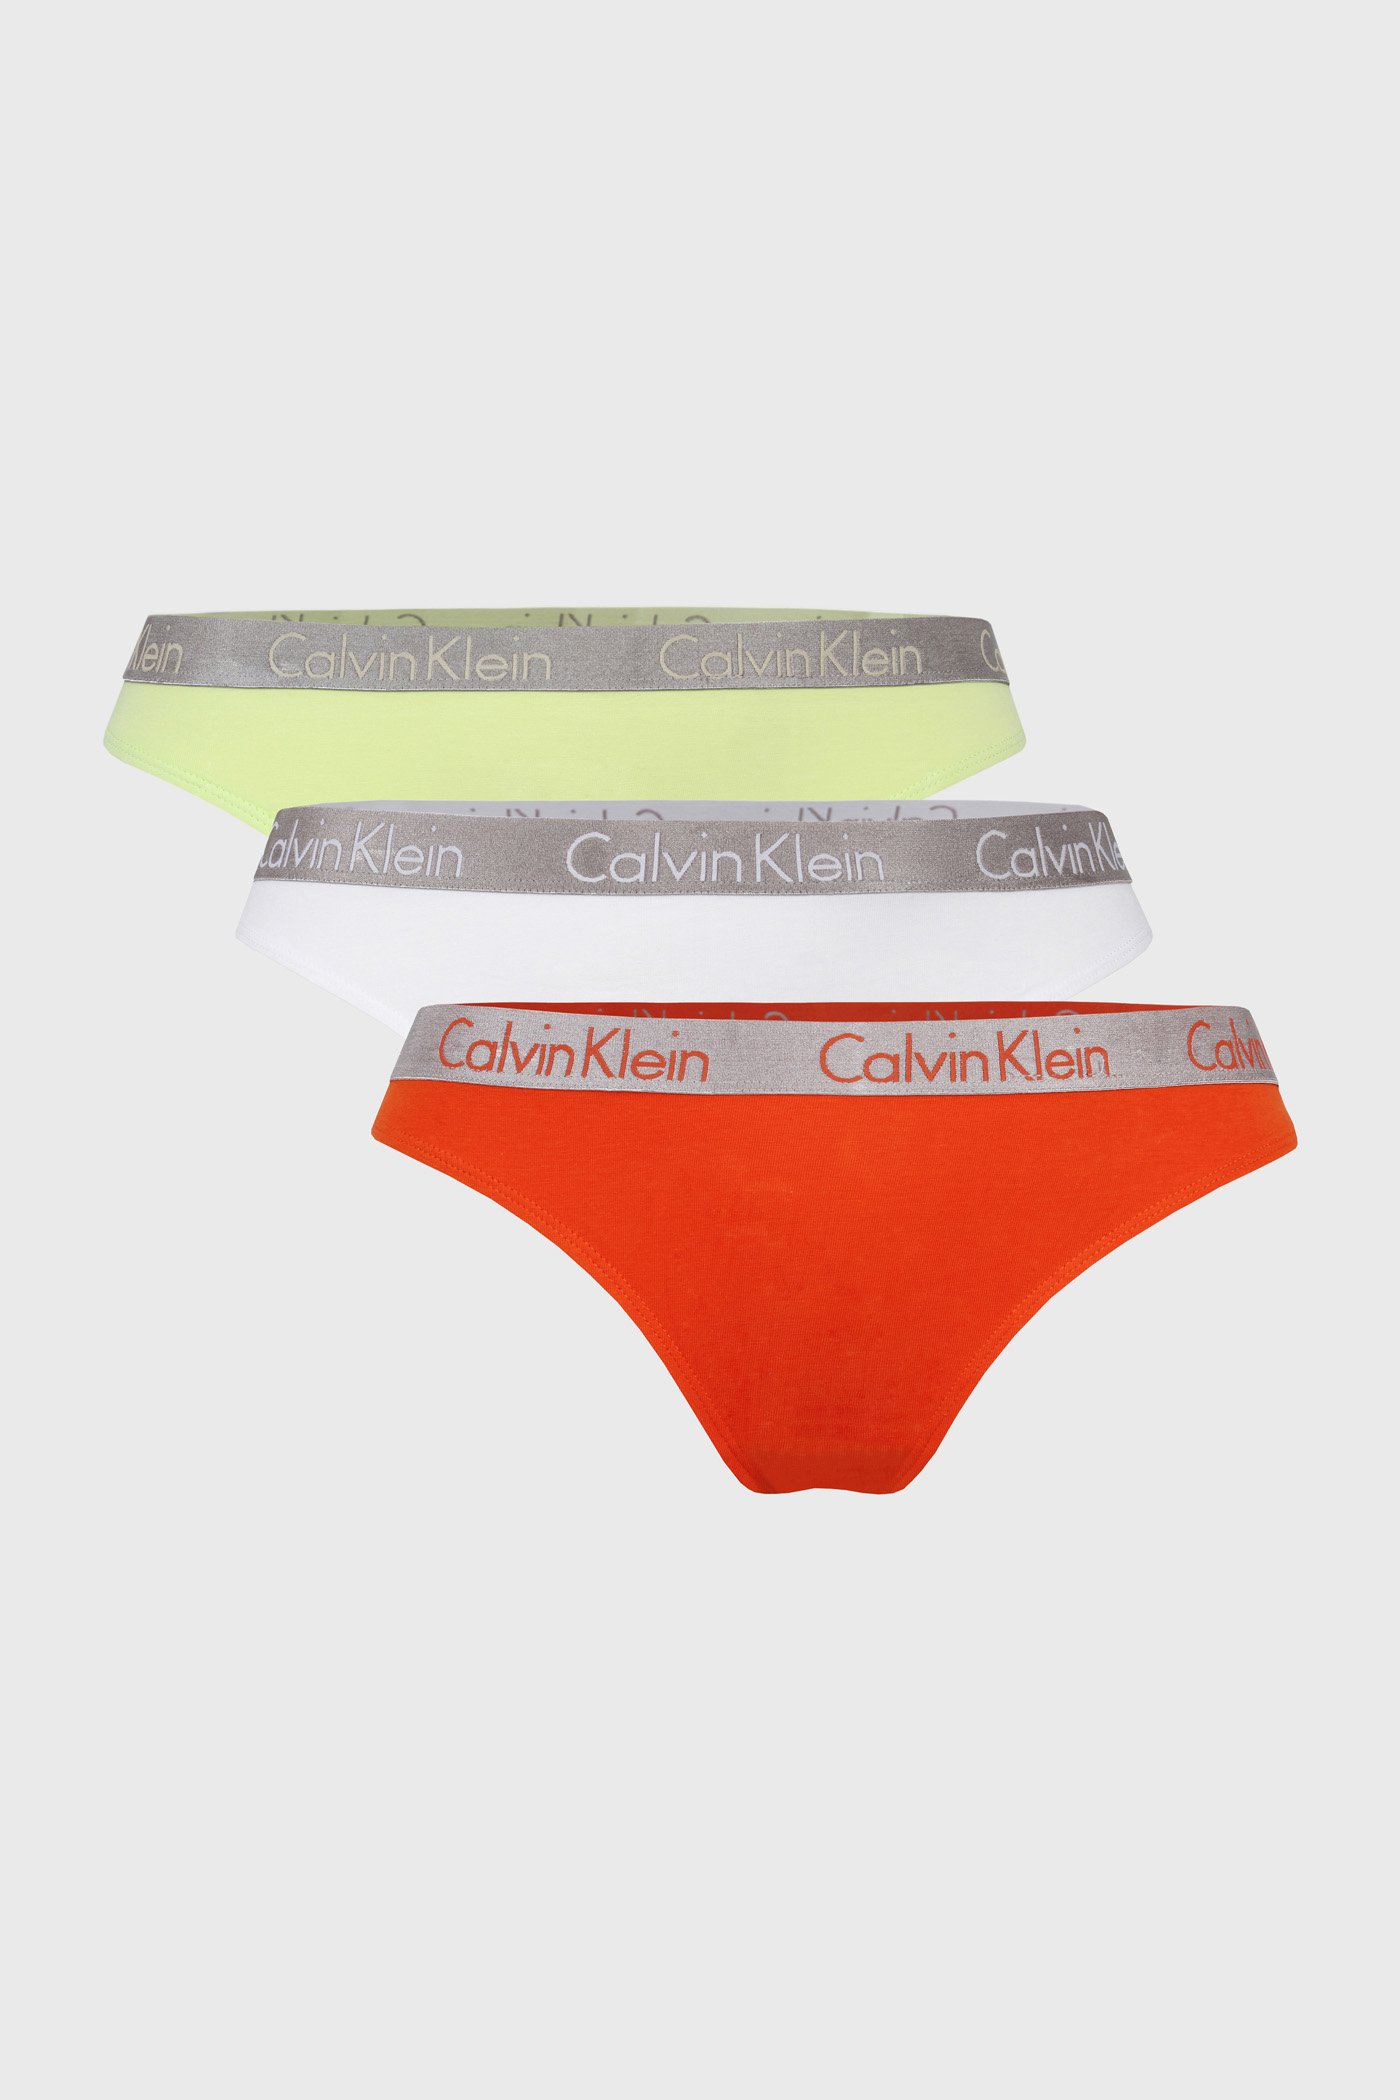 3 PACK tangice Calvin Klein One micro | Astratex.si